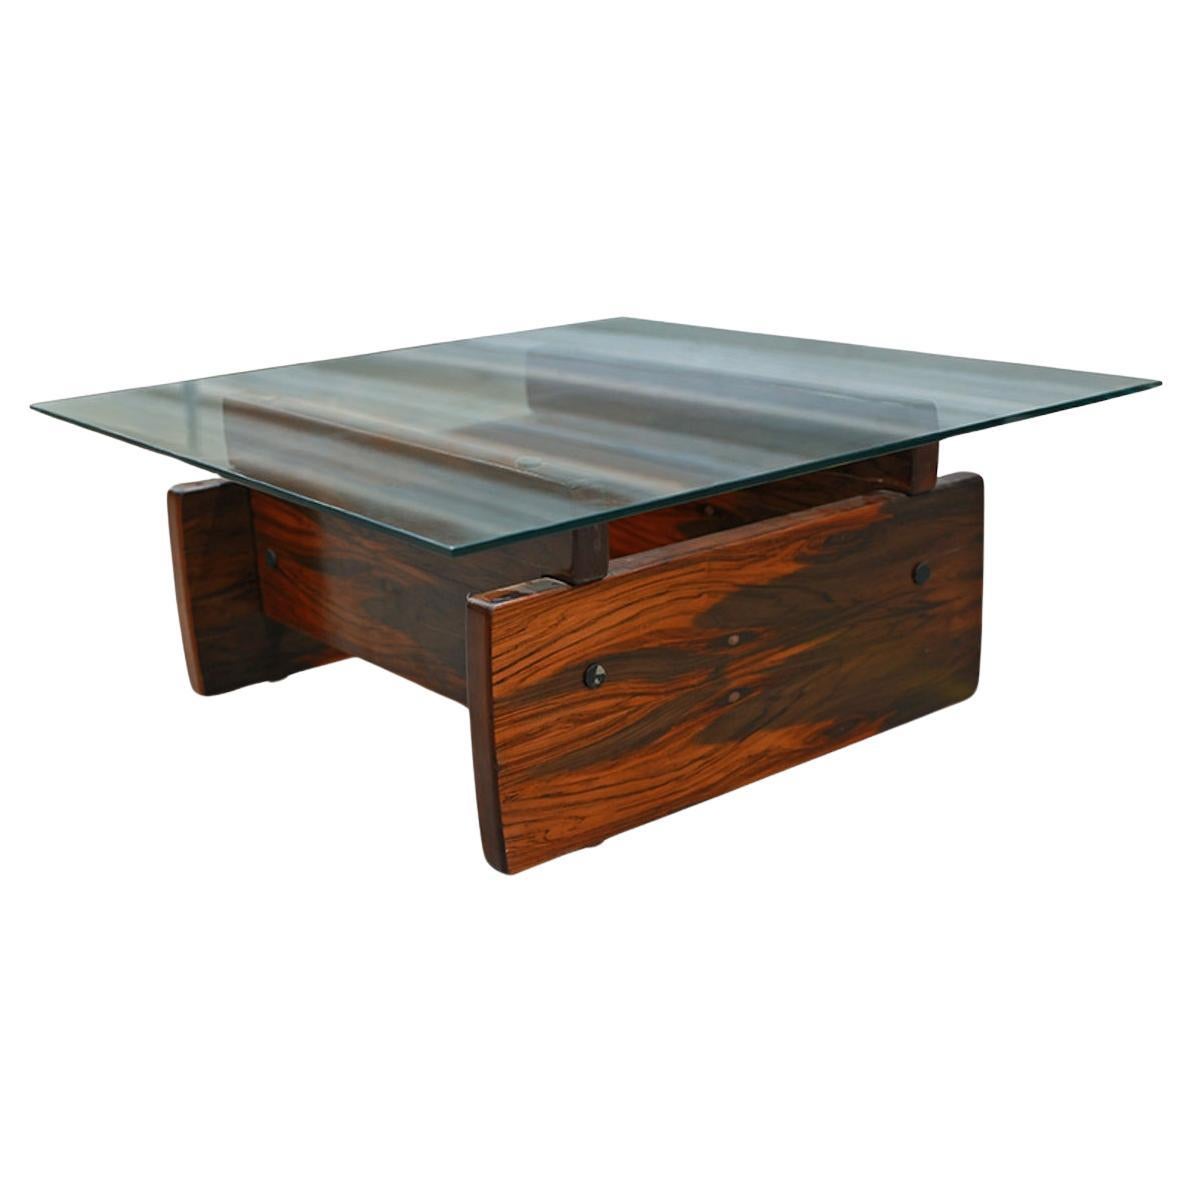 Mid-century Modern Coffee Table in Hardwood and Glass, Sergio Rodrigues, Brazil For Sale